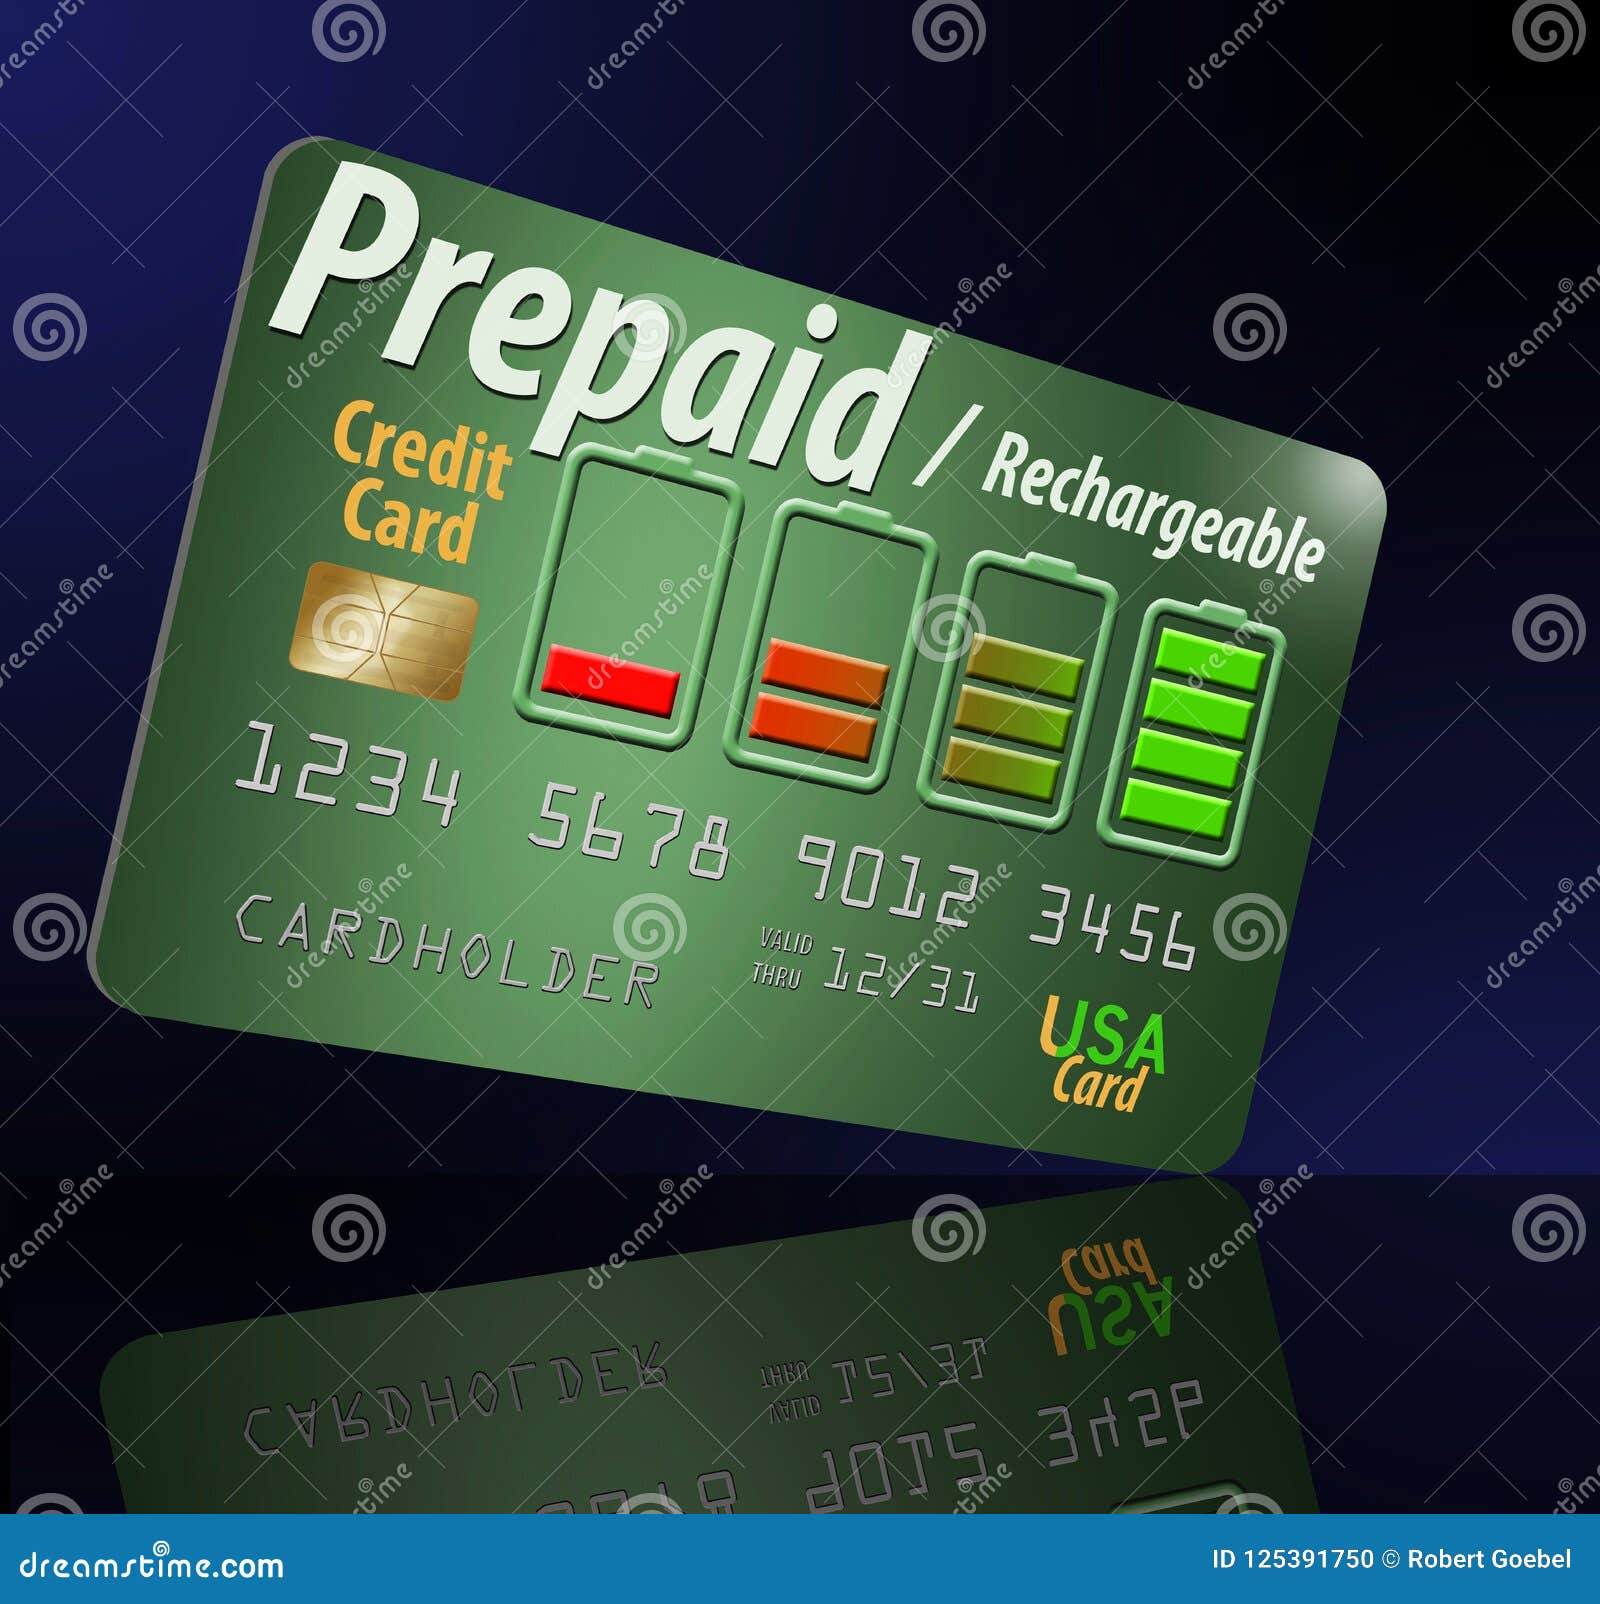 Here is a Rechargeable, Refillable Prepaid Credit Card. Stock